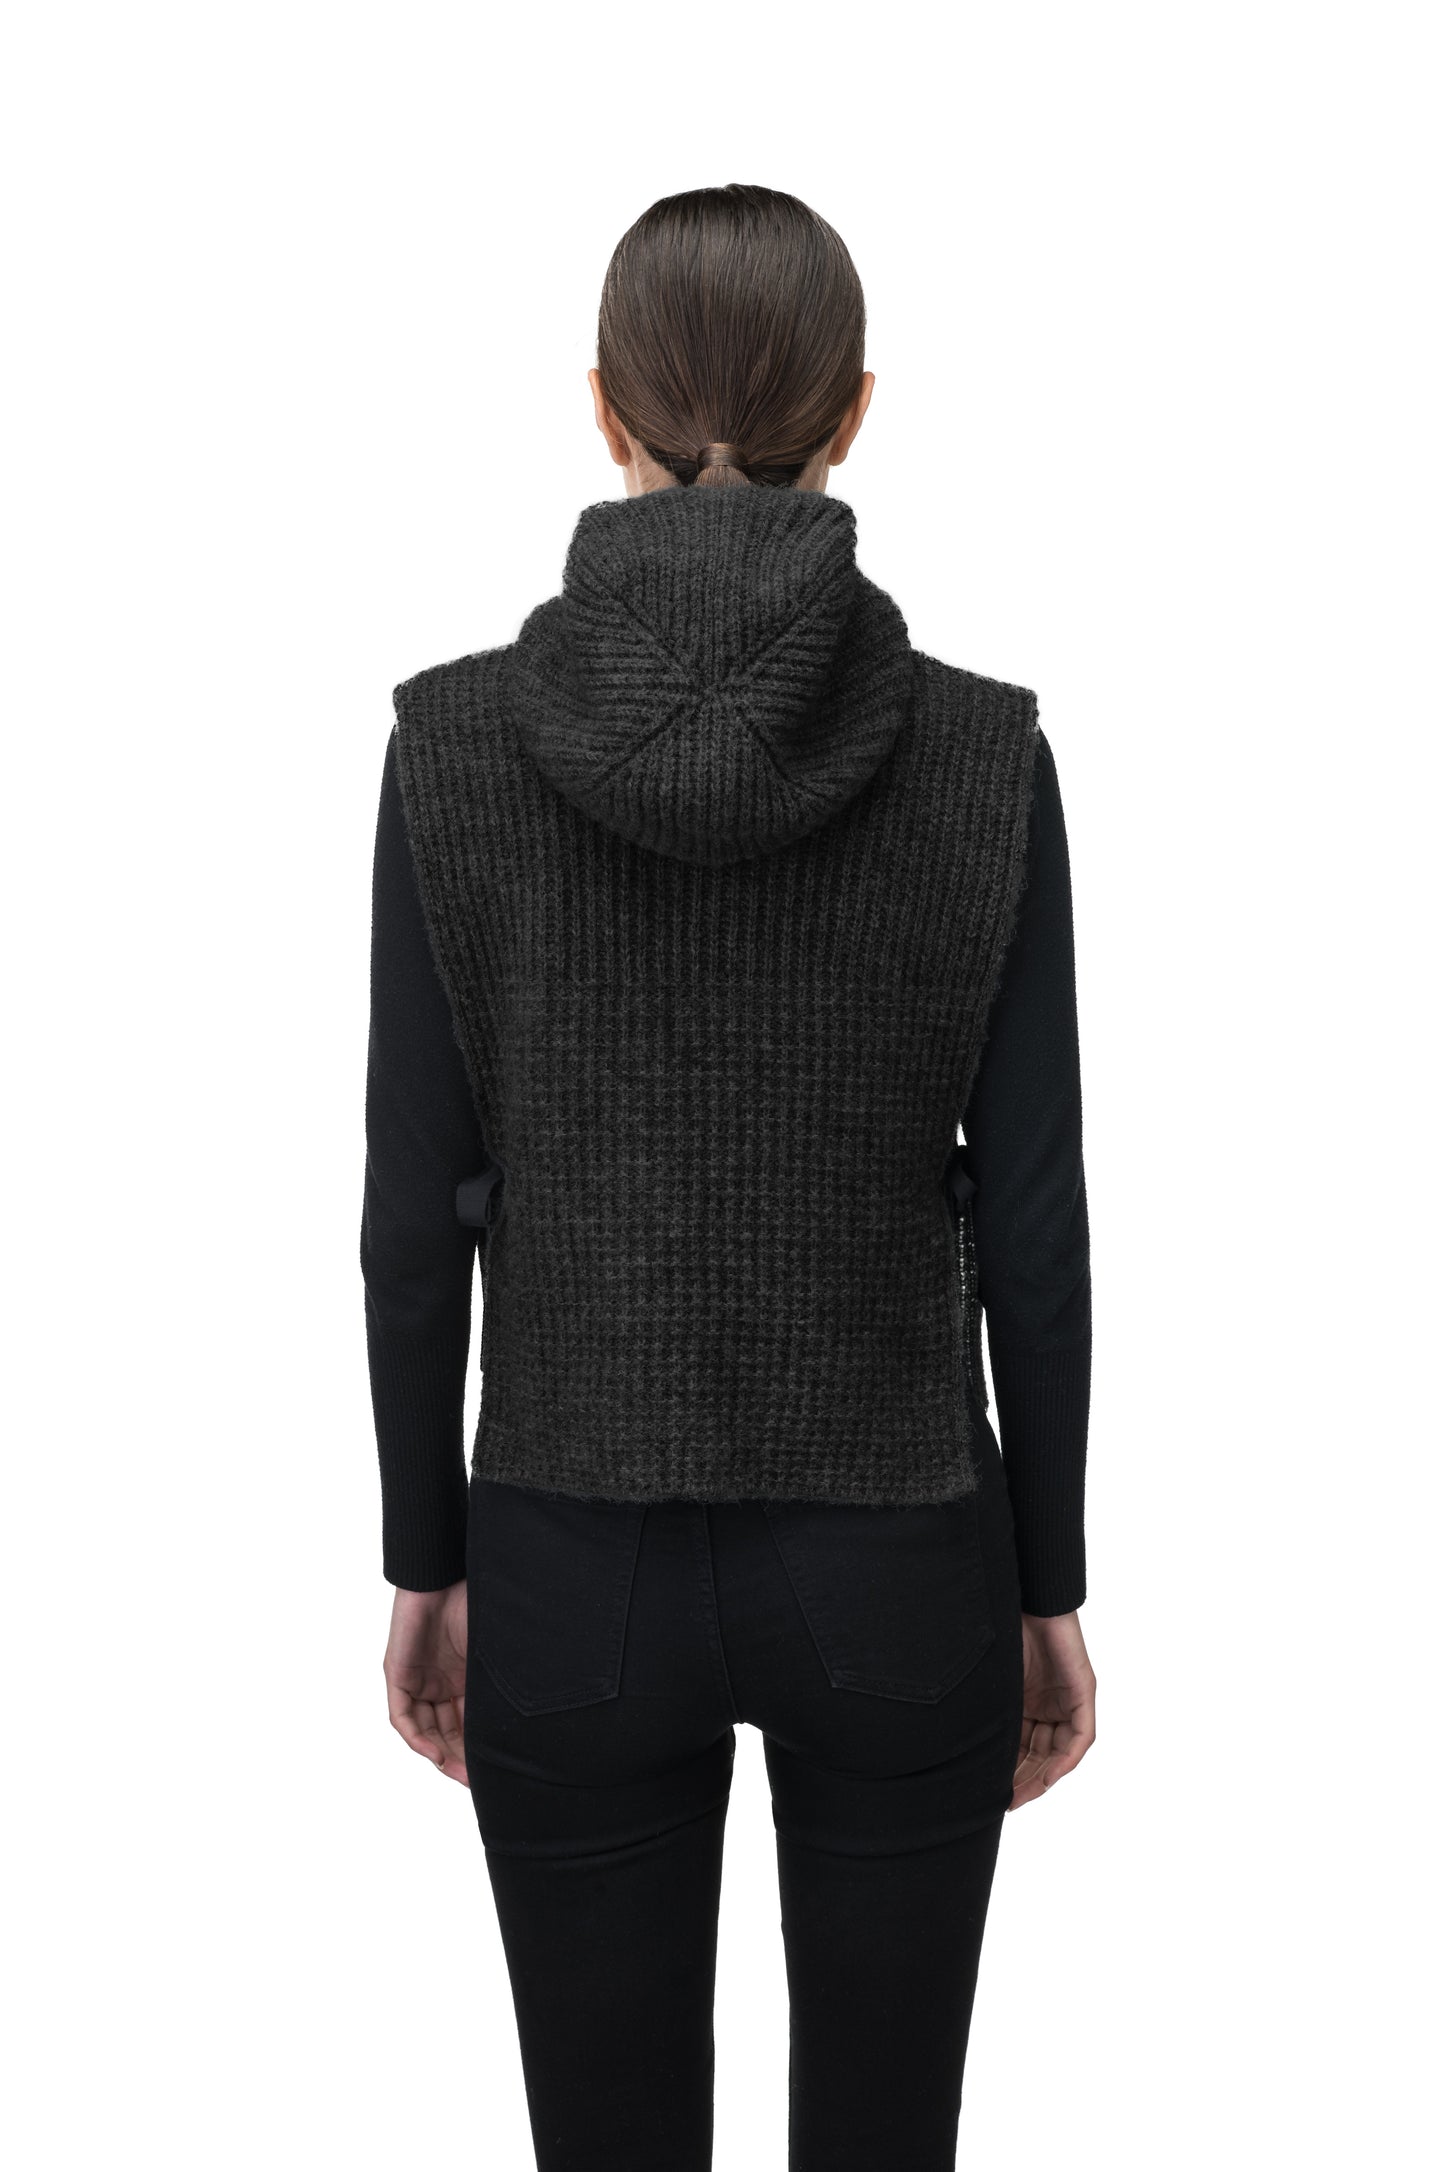 Nars Unisex Knit Hooded Dickie in in superfine alpaca and merino wool blend, waist length, fitted hood, sleeveless torso, and side webbing straps to adjust fit, in Black